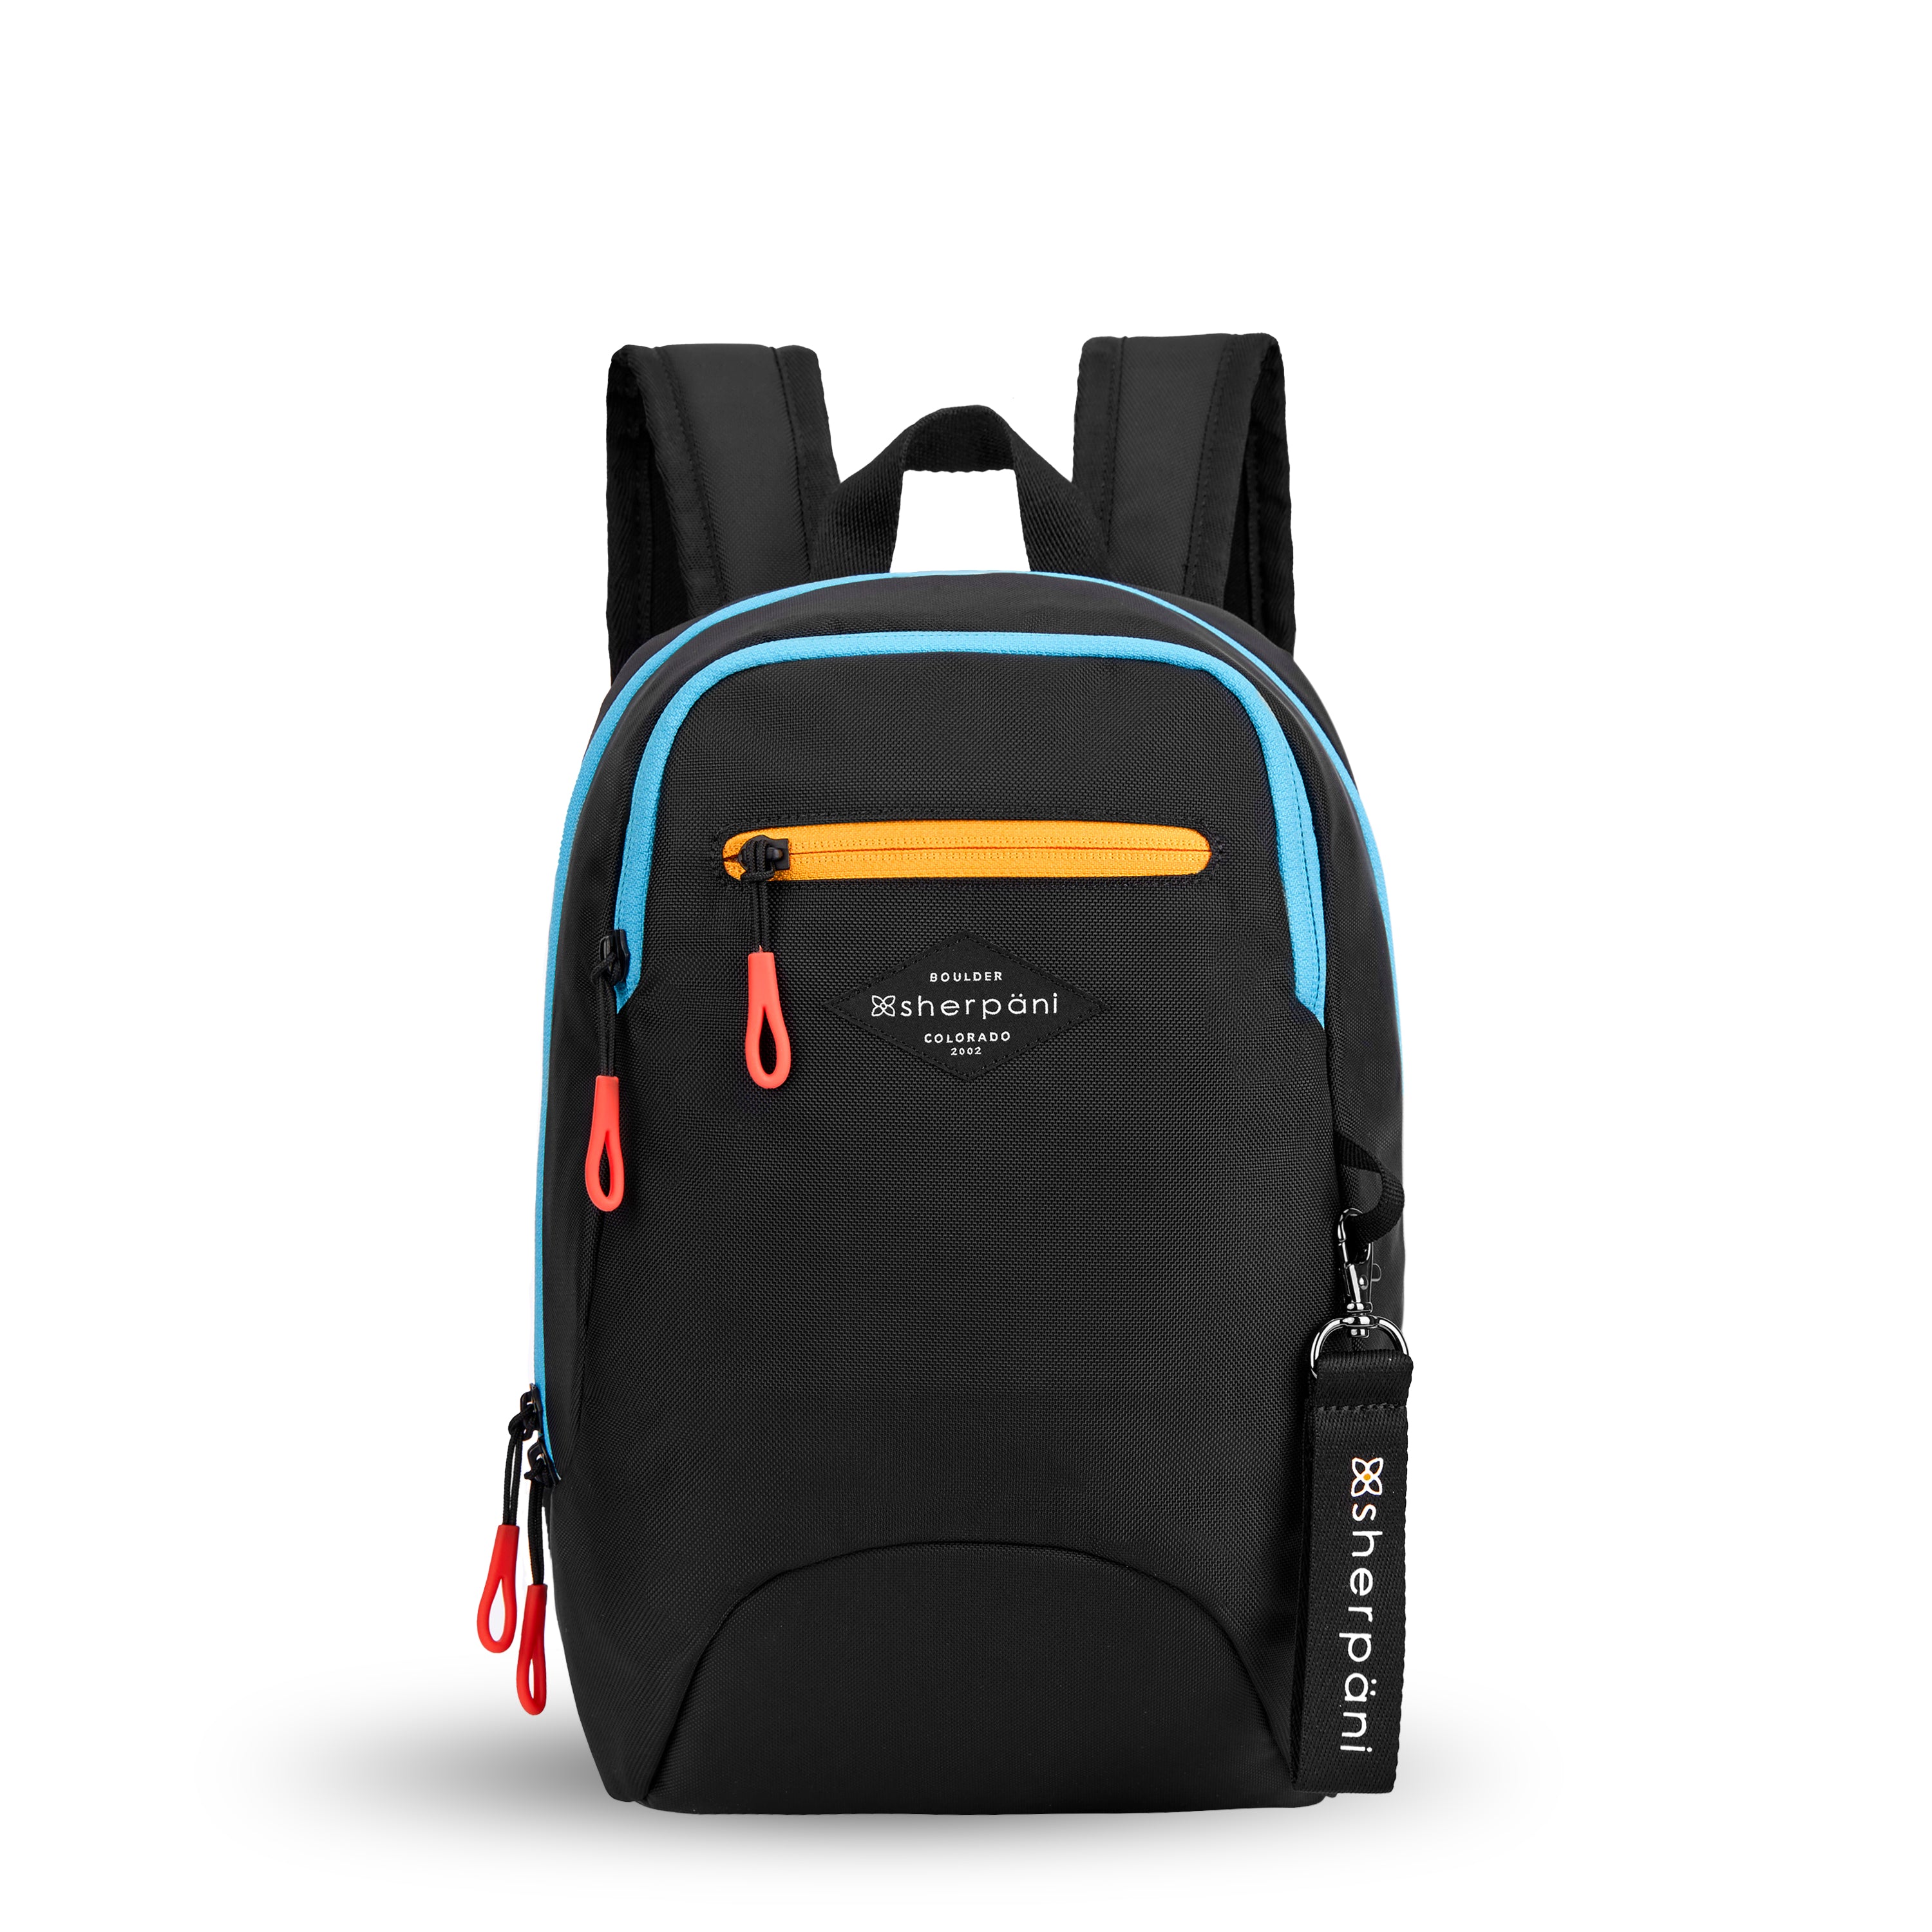 Flat front view of Sherpani mini backpack, the Vespa in Chromatic. The bag is mostly black and has accents in yellow and blue. It features easy-pull zippers accented in red. It has padded and adjustable backpack straps, as well as a tote handle for easy carrying. The bag has a main zipper compartment, a smaller secondary zipper compartment and an external zipper pocket on the front. A branded Sherpani keychain is clipped to a fabric loop on the front of the bag.